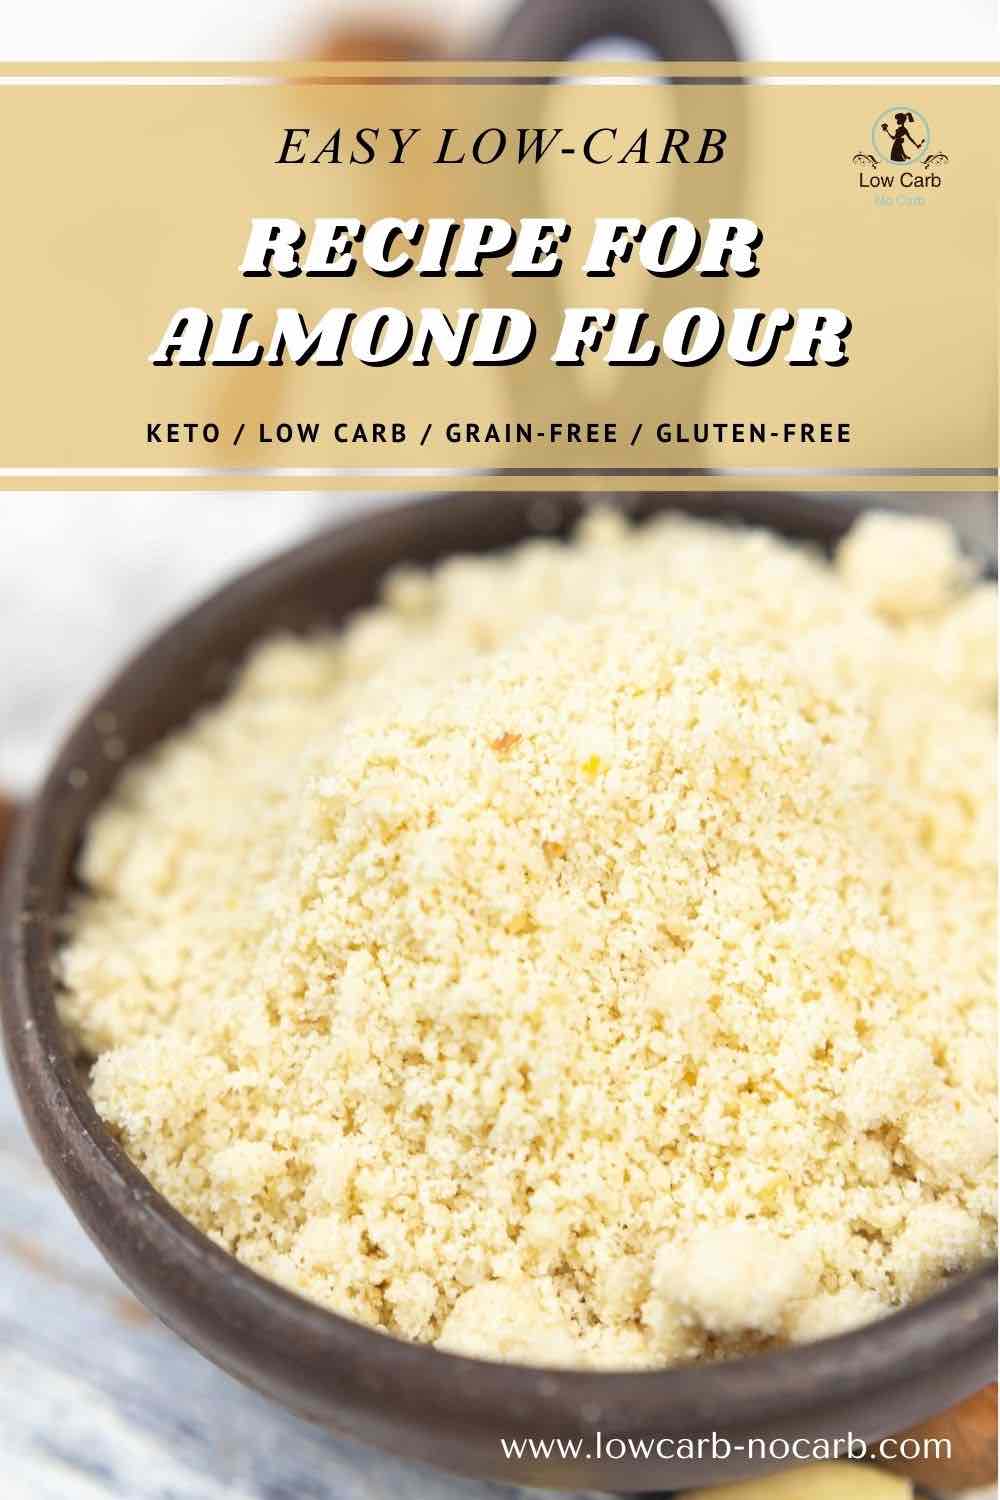 A bowl of almond flour with text overlay listing it as an easy recipe ingredient, noting its keto, low carb, grain-free, and gluten-free qualities.